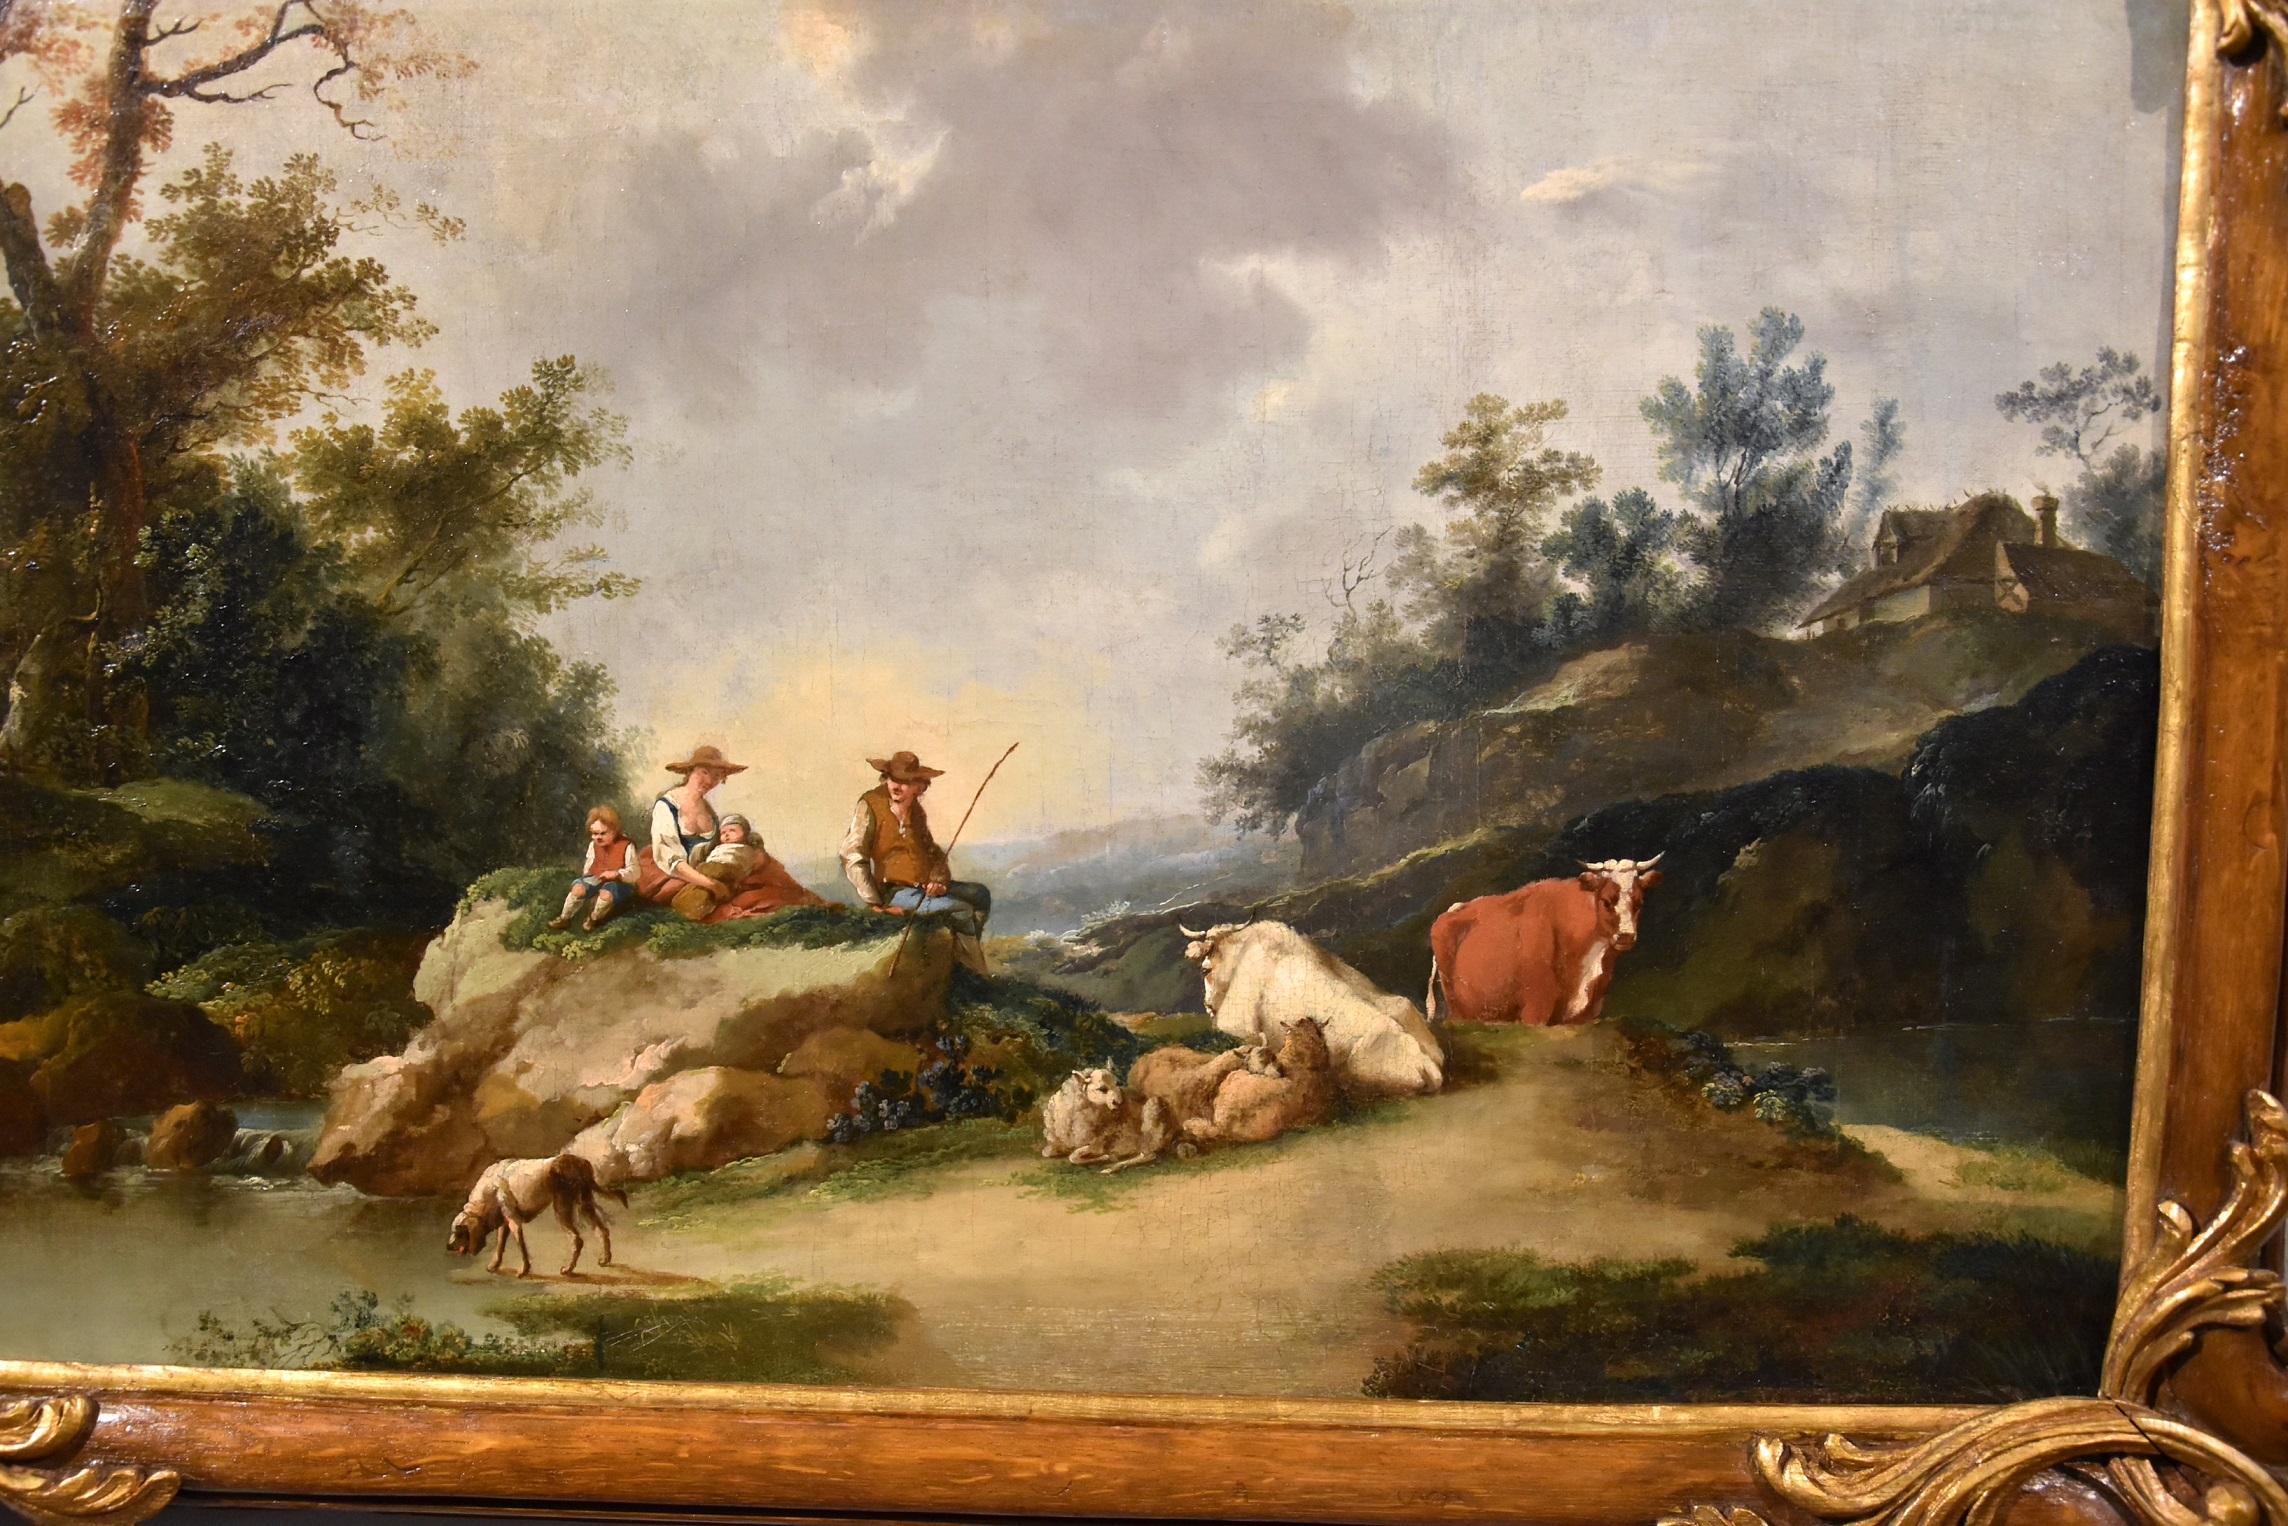 Landscape Zuccarelli Paint Oil on canvas Old master 18th Century Italian View For Sale 6